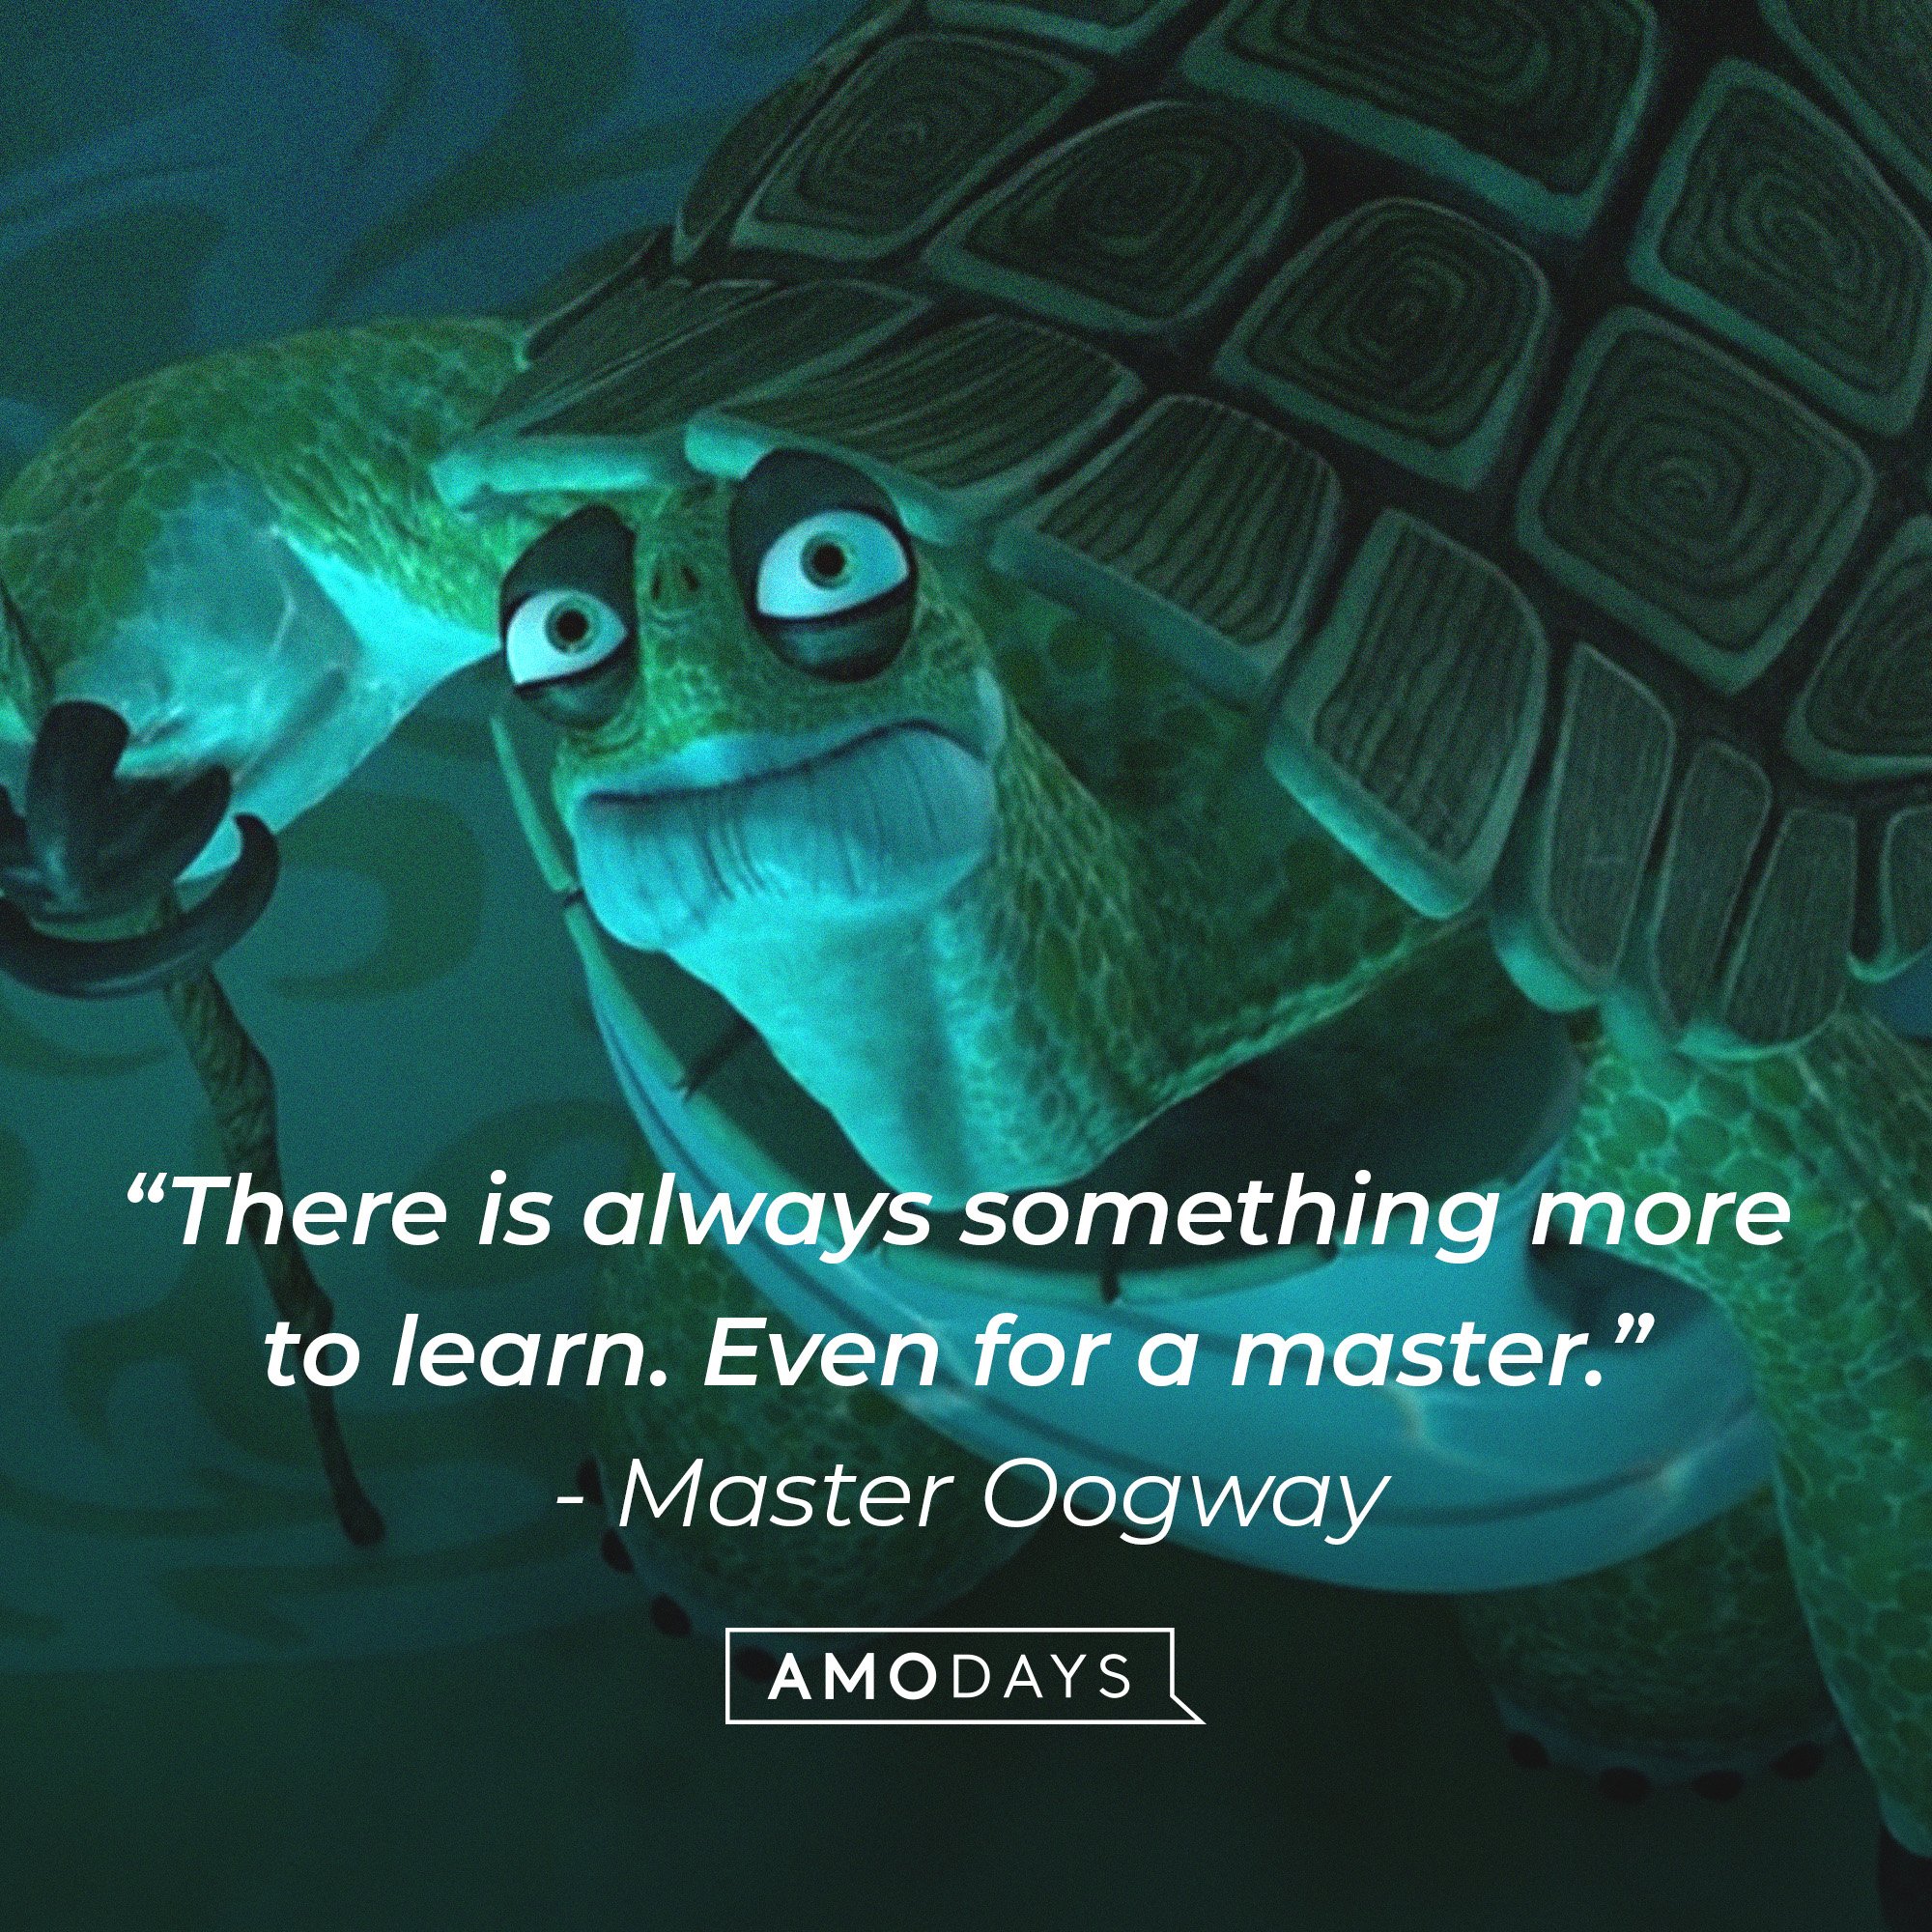 Master Oogway’s quote: “There is always something more to learn. Even for a master.” | Image: AmoDays